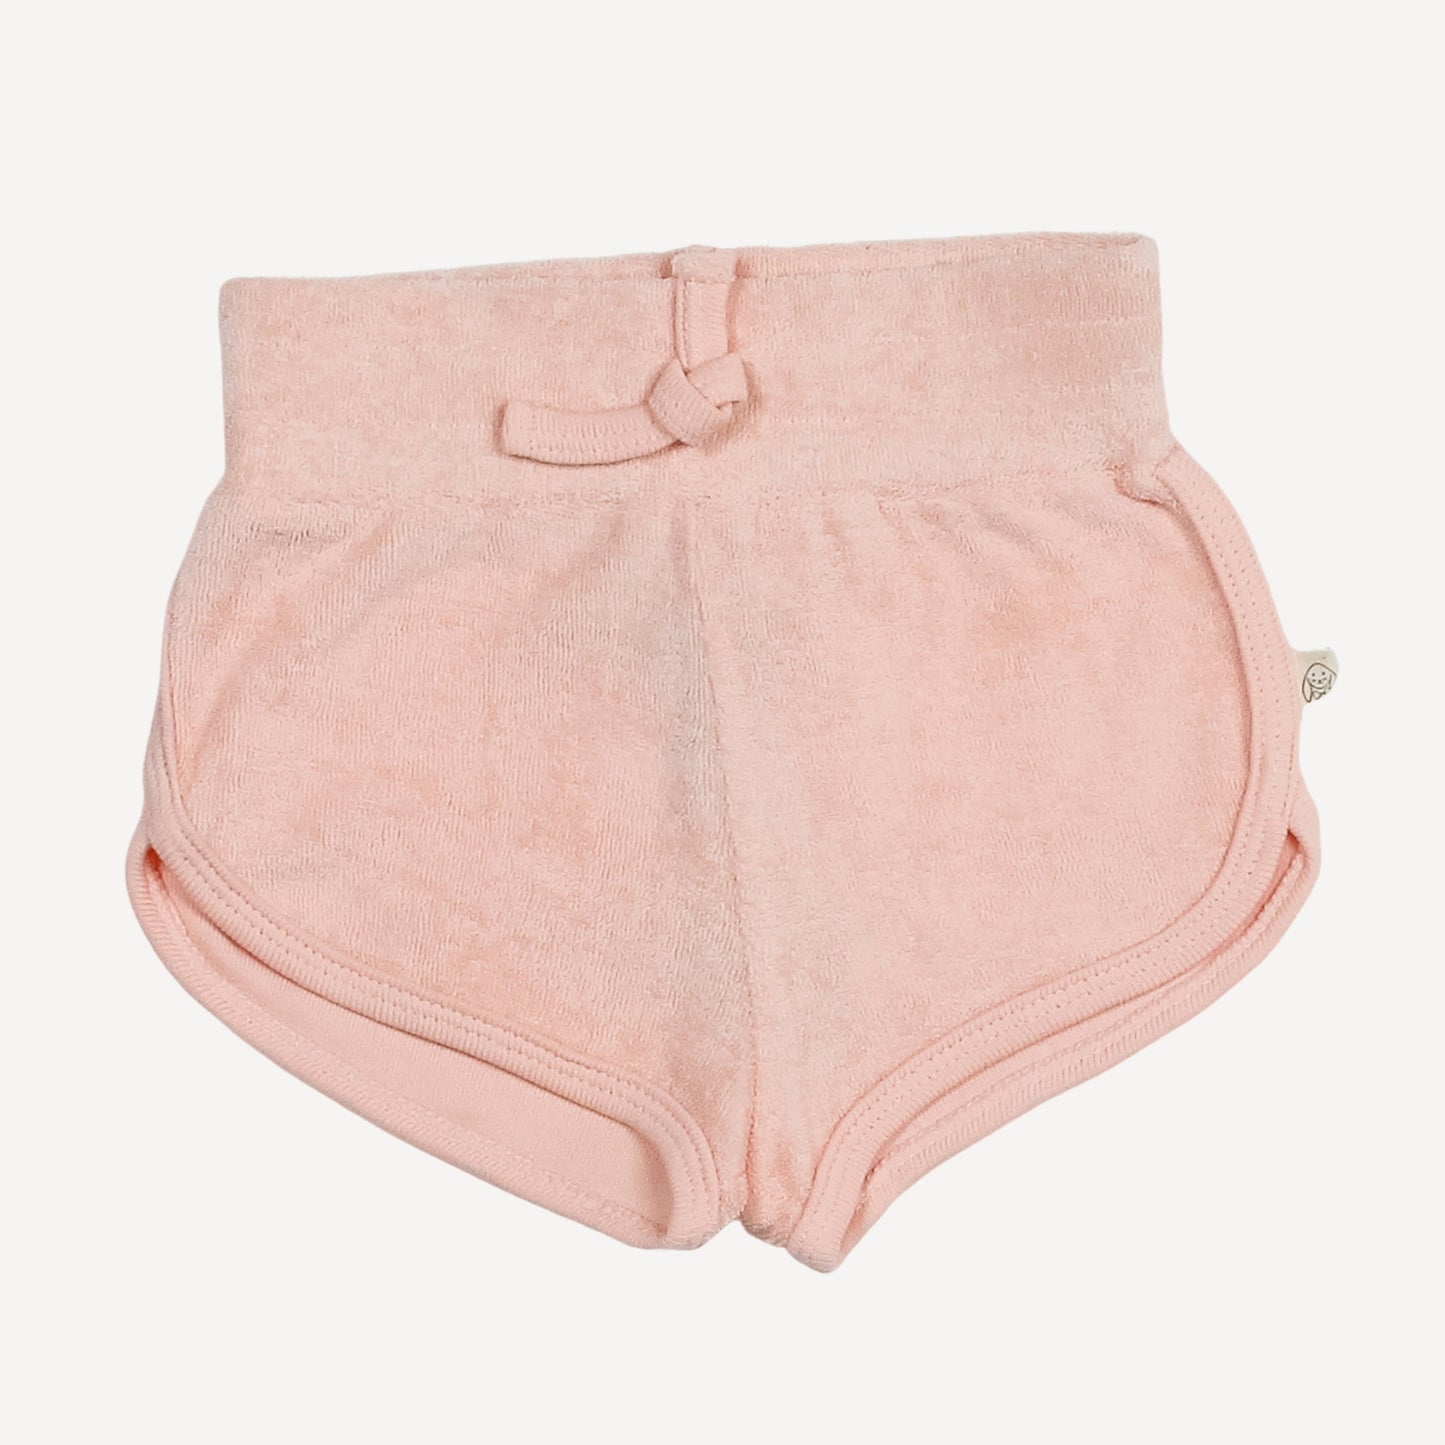 Retro Shorts | Pink Terry